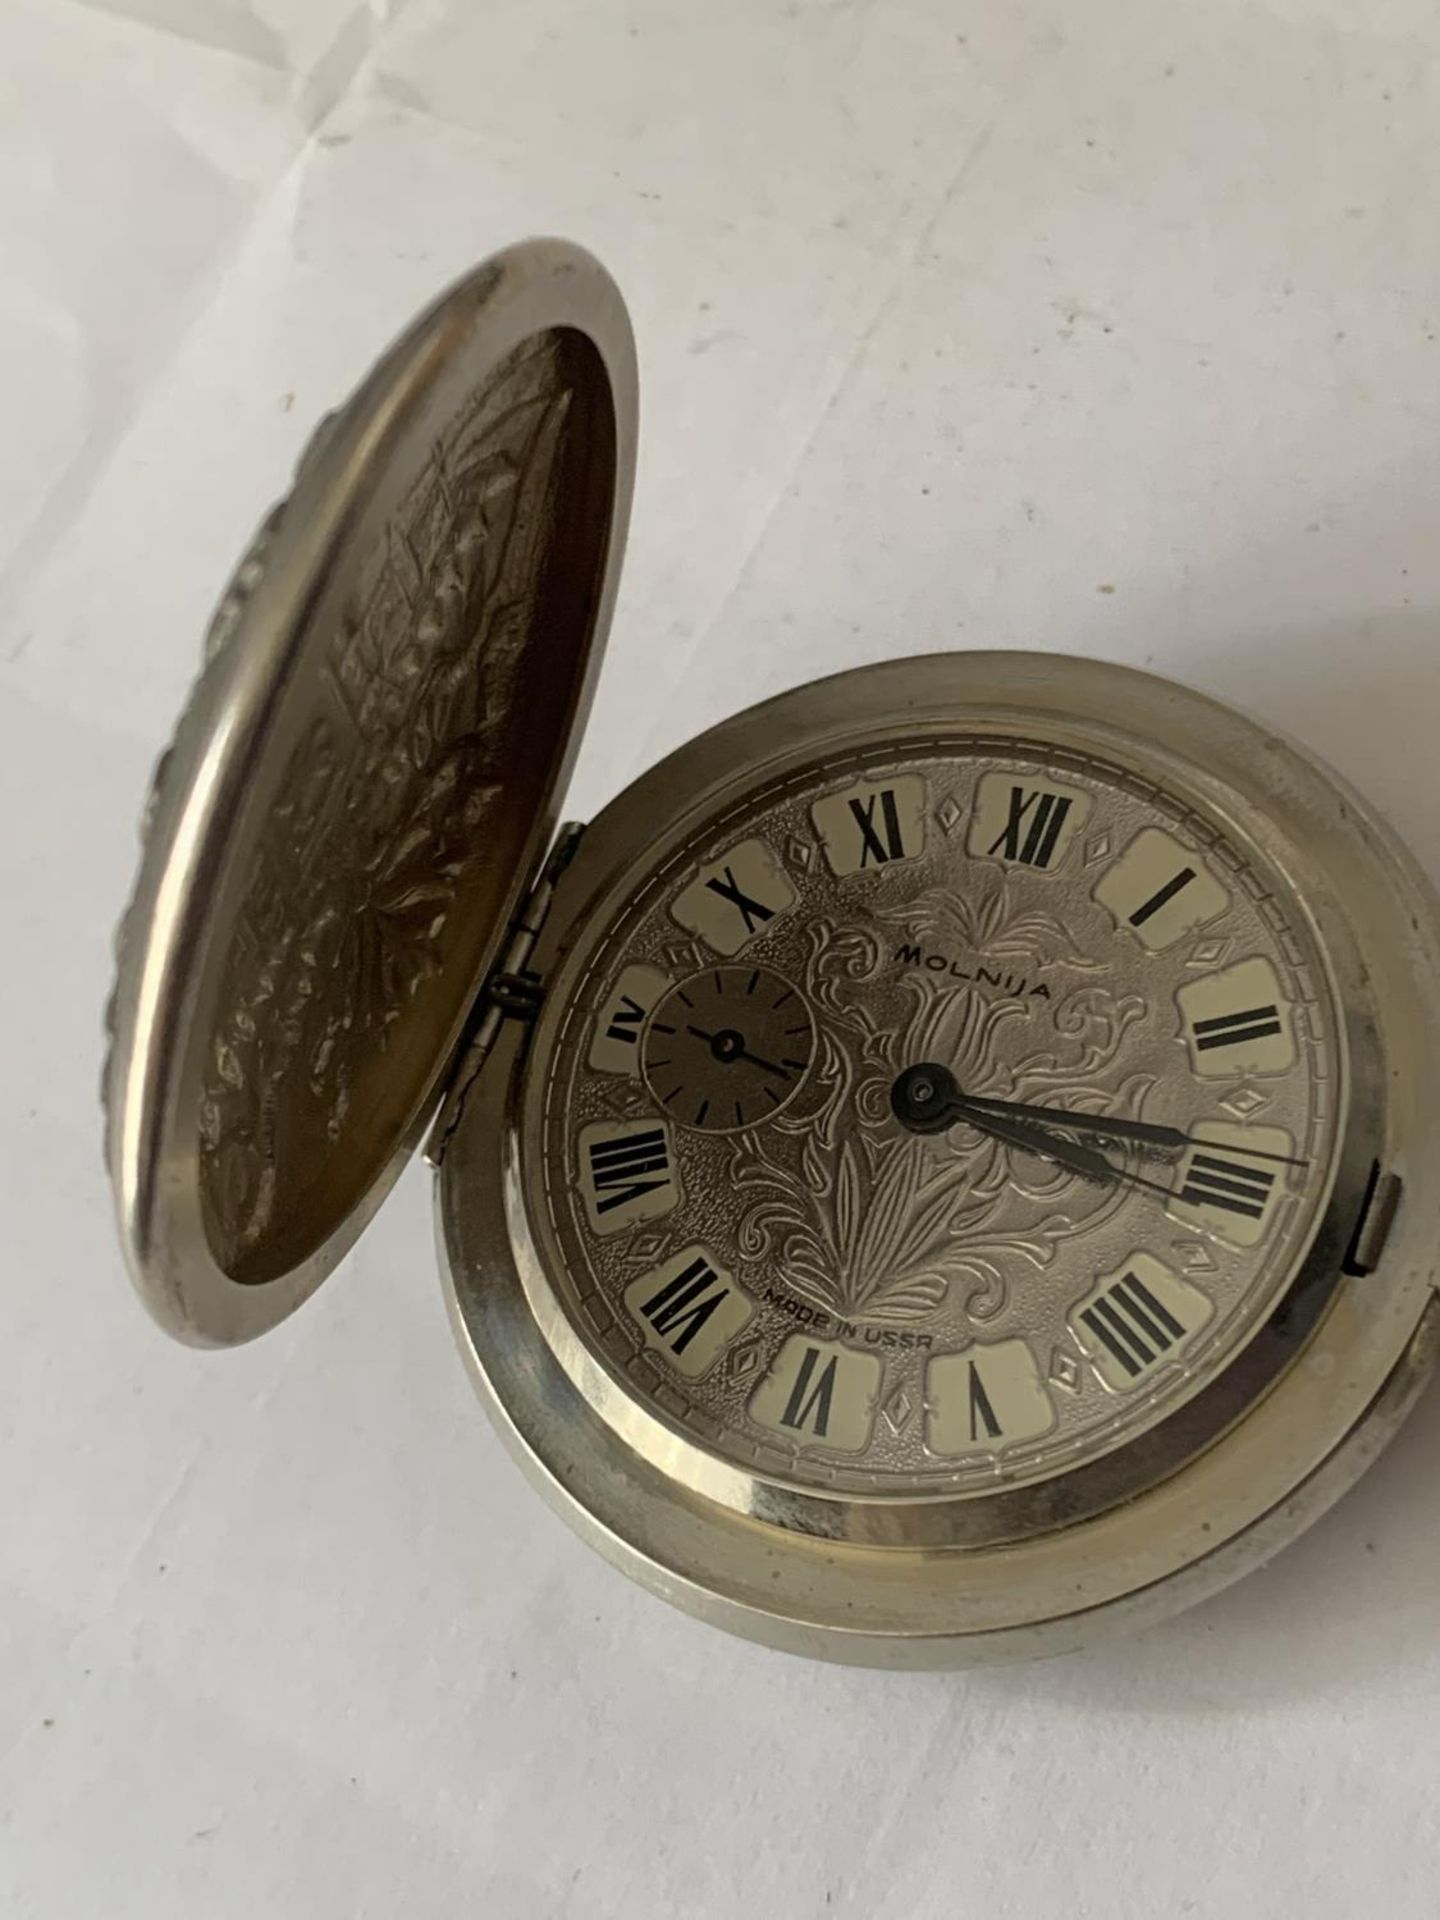 A POCKET WATCH WITH IMPERIAL RUSSIAN EAGLE ON THE FRONT AND A POLISH EAGLE TO THE REAR - Image 3 of 4